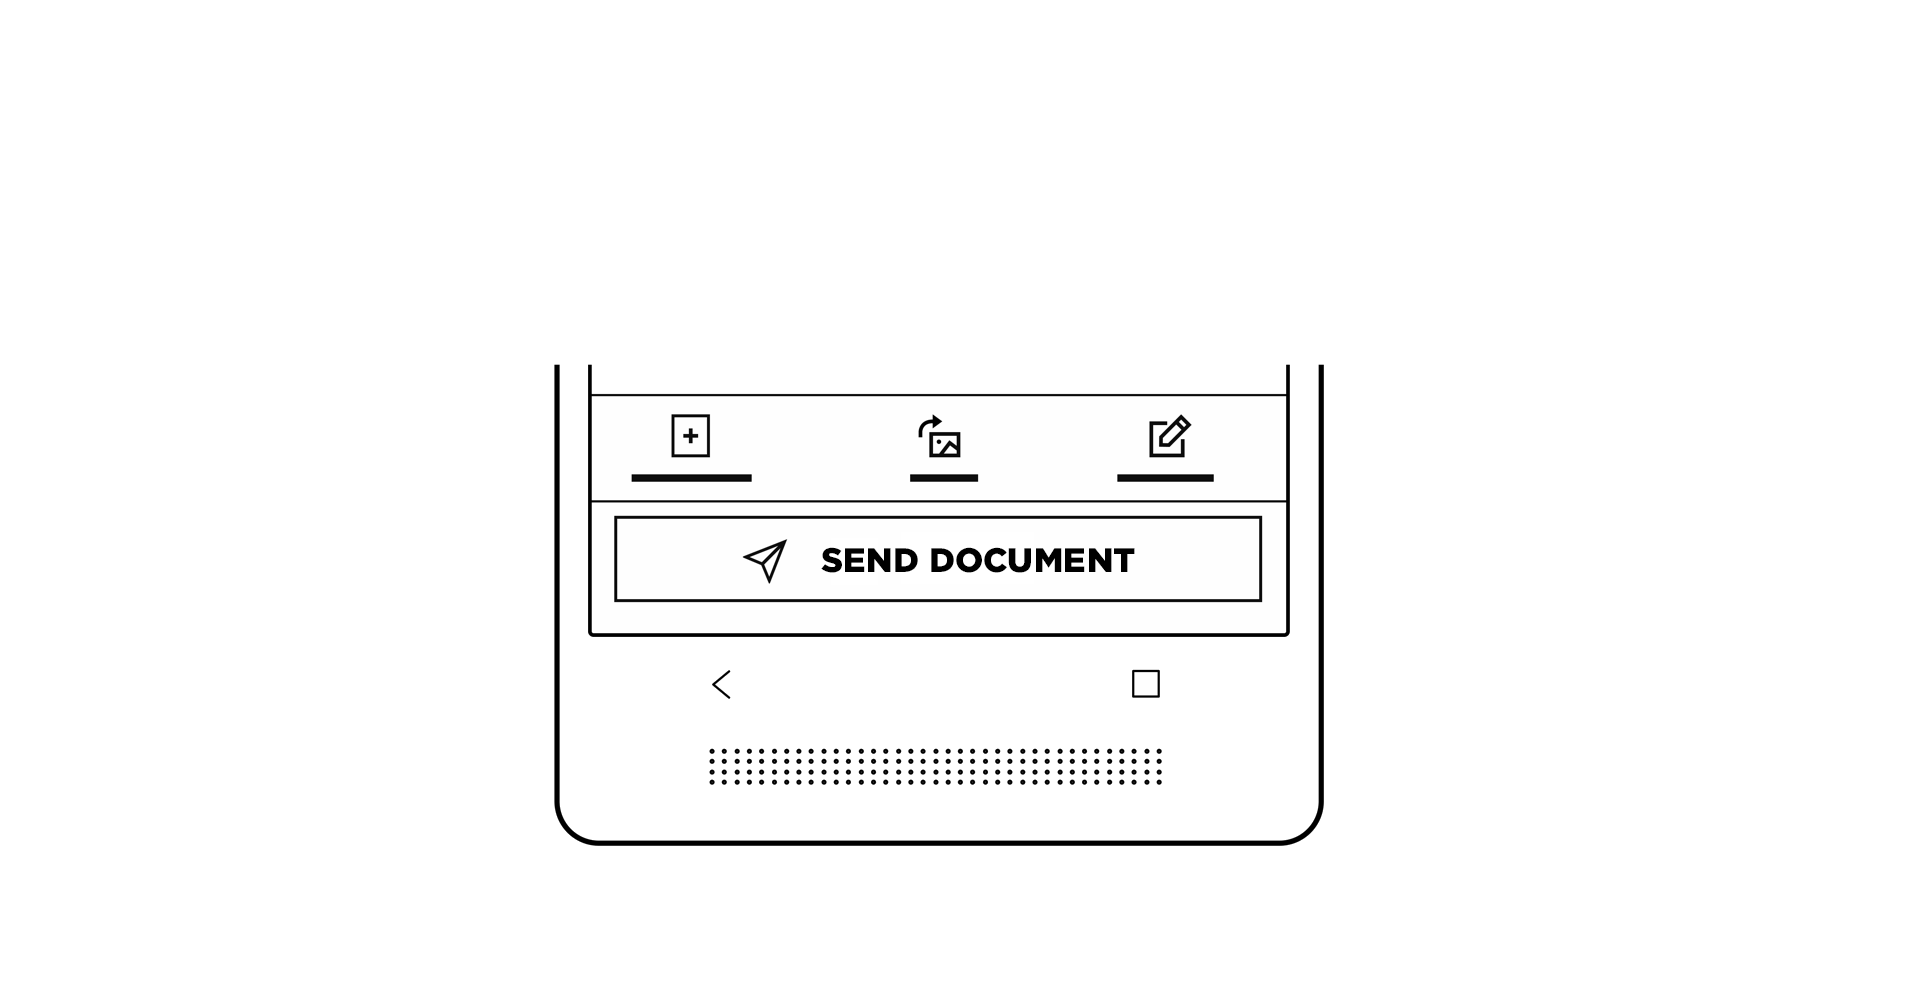 Click on «Send» to submit your document directly to the target application ... DONE !